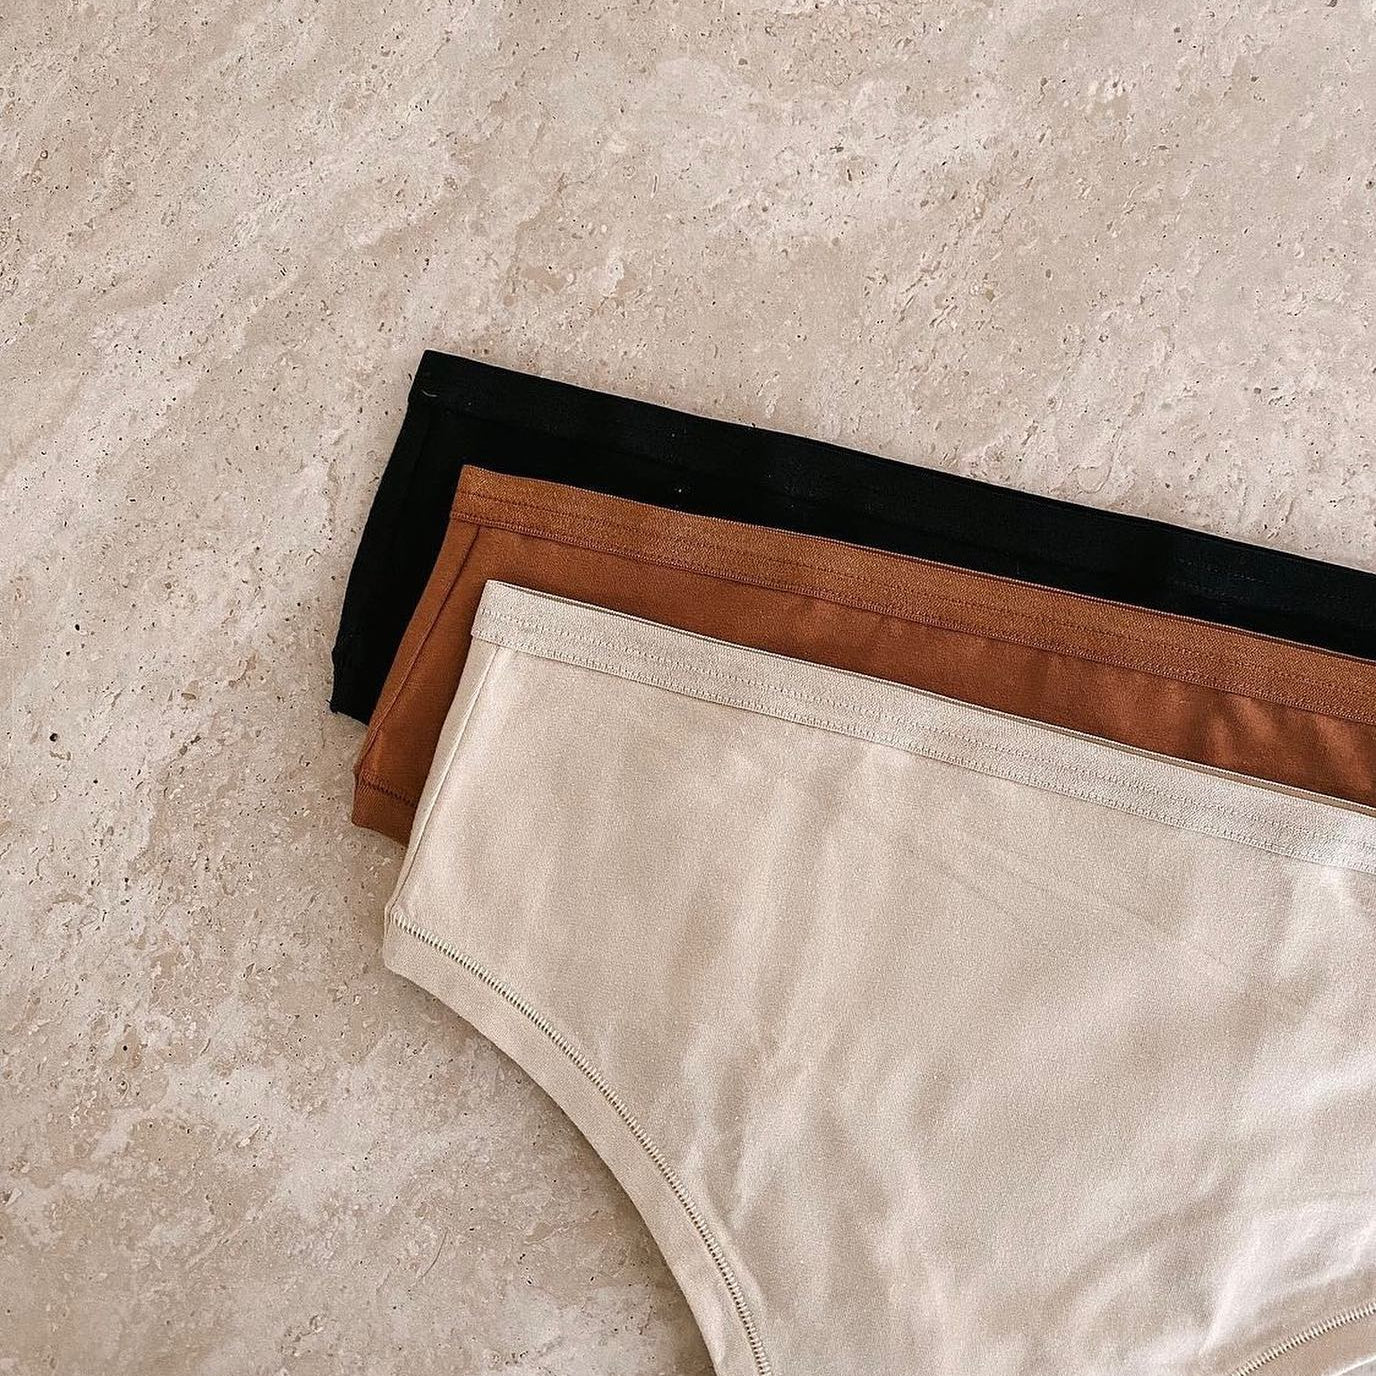  Knickey white, brown, and black panties laying flat on a white background.